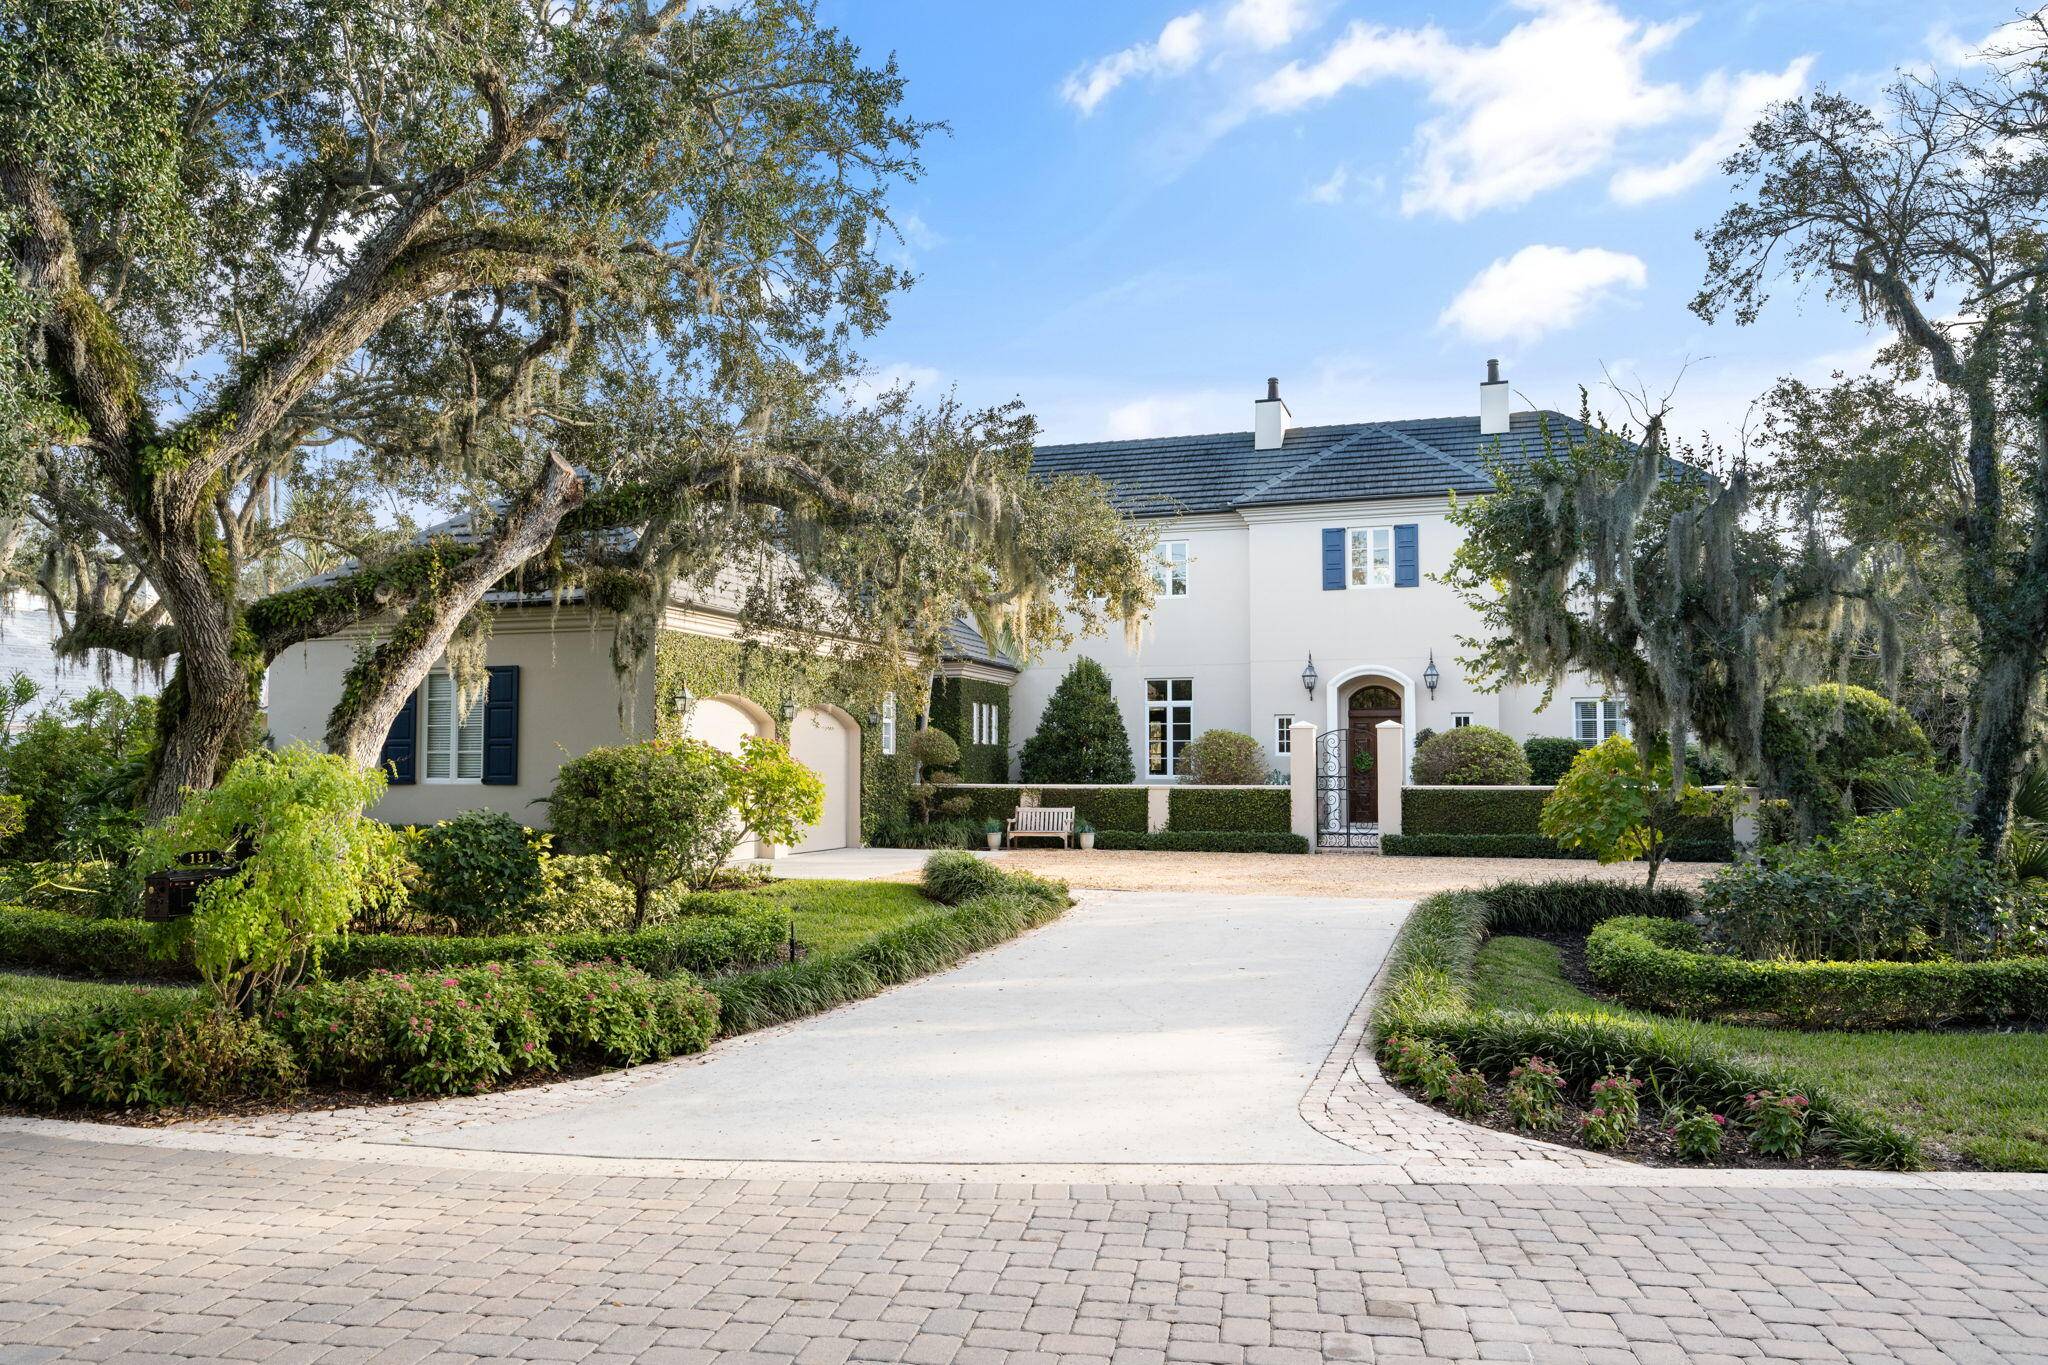 This exquisite lakeside estate epitomizes luxury living with its stunning architecture.